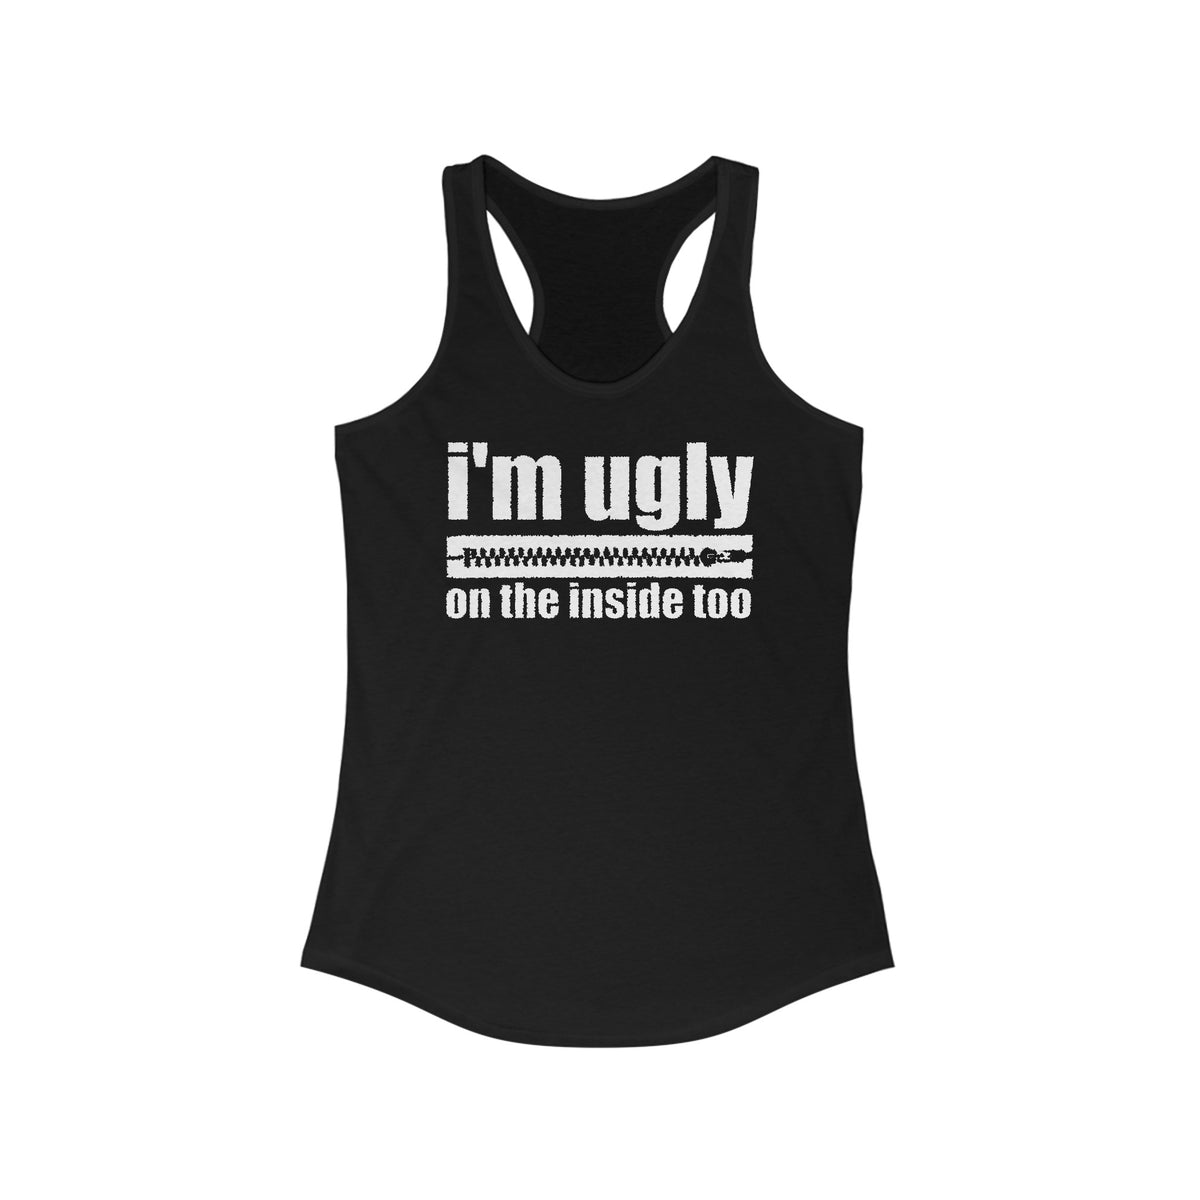 I'm Ugly On The Inside Too - Women's Racerback Tank